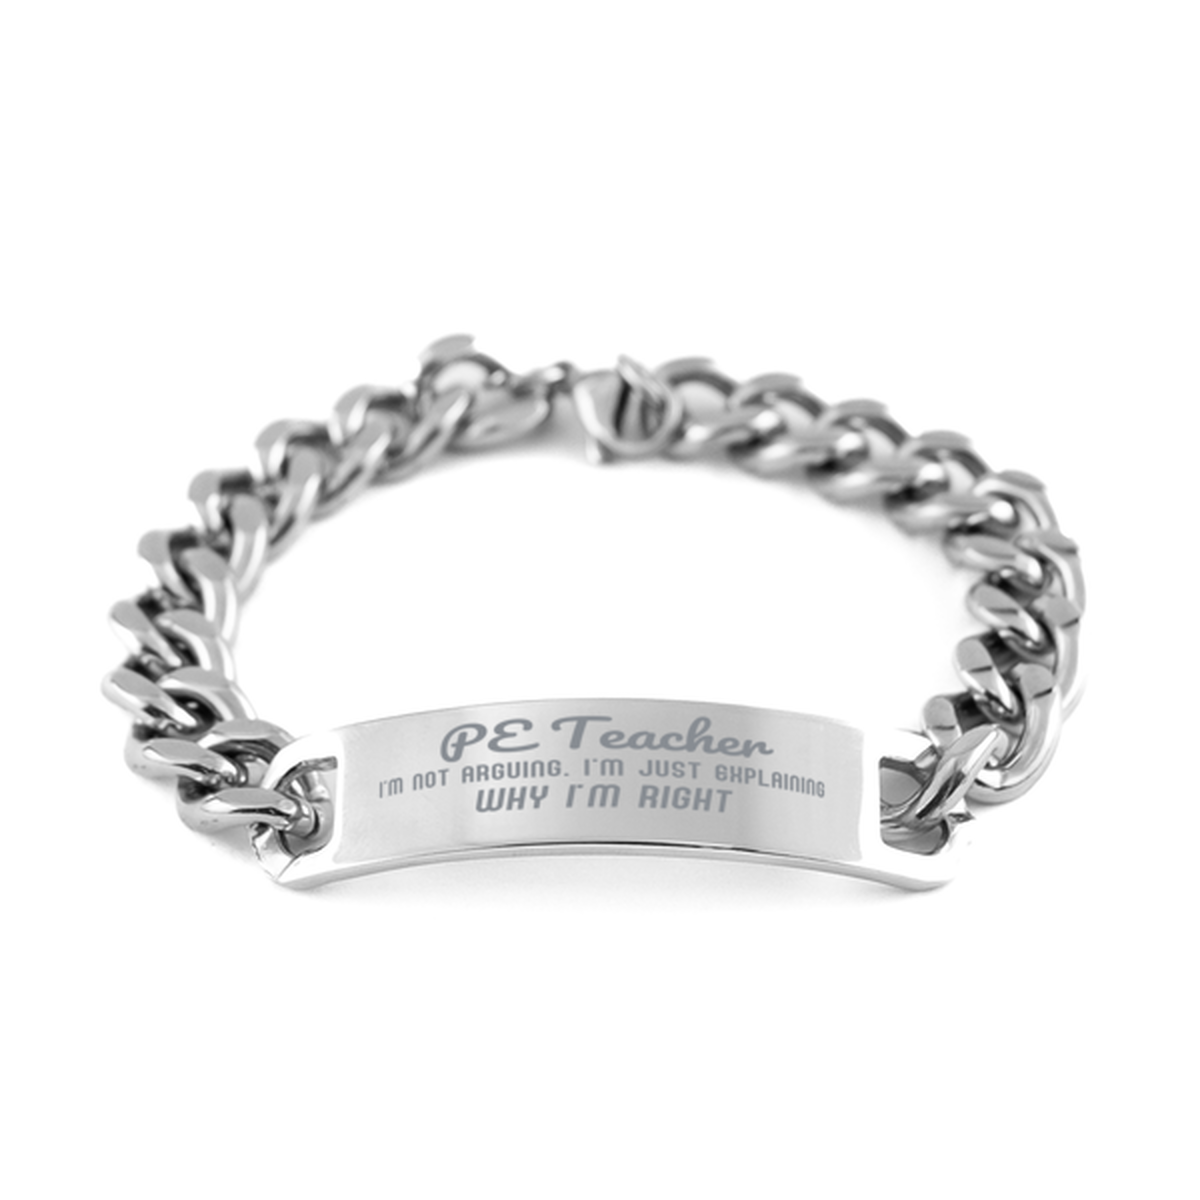 PE Teacher I'm not Arguing. I'm Just Explaining Why I'm RIGHT Cuban Chain Stainless Steel Bracelet, Graduation Birthday Christmas PE Teacher Gifts For PE Teacher Funny Saying Quote Present for Men Women Coworker